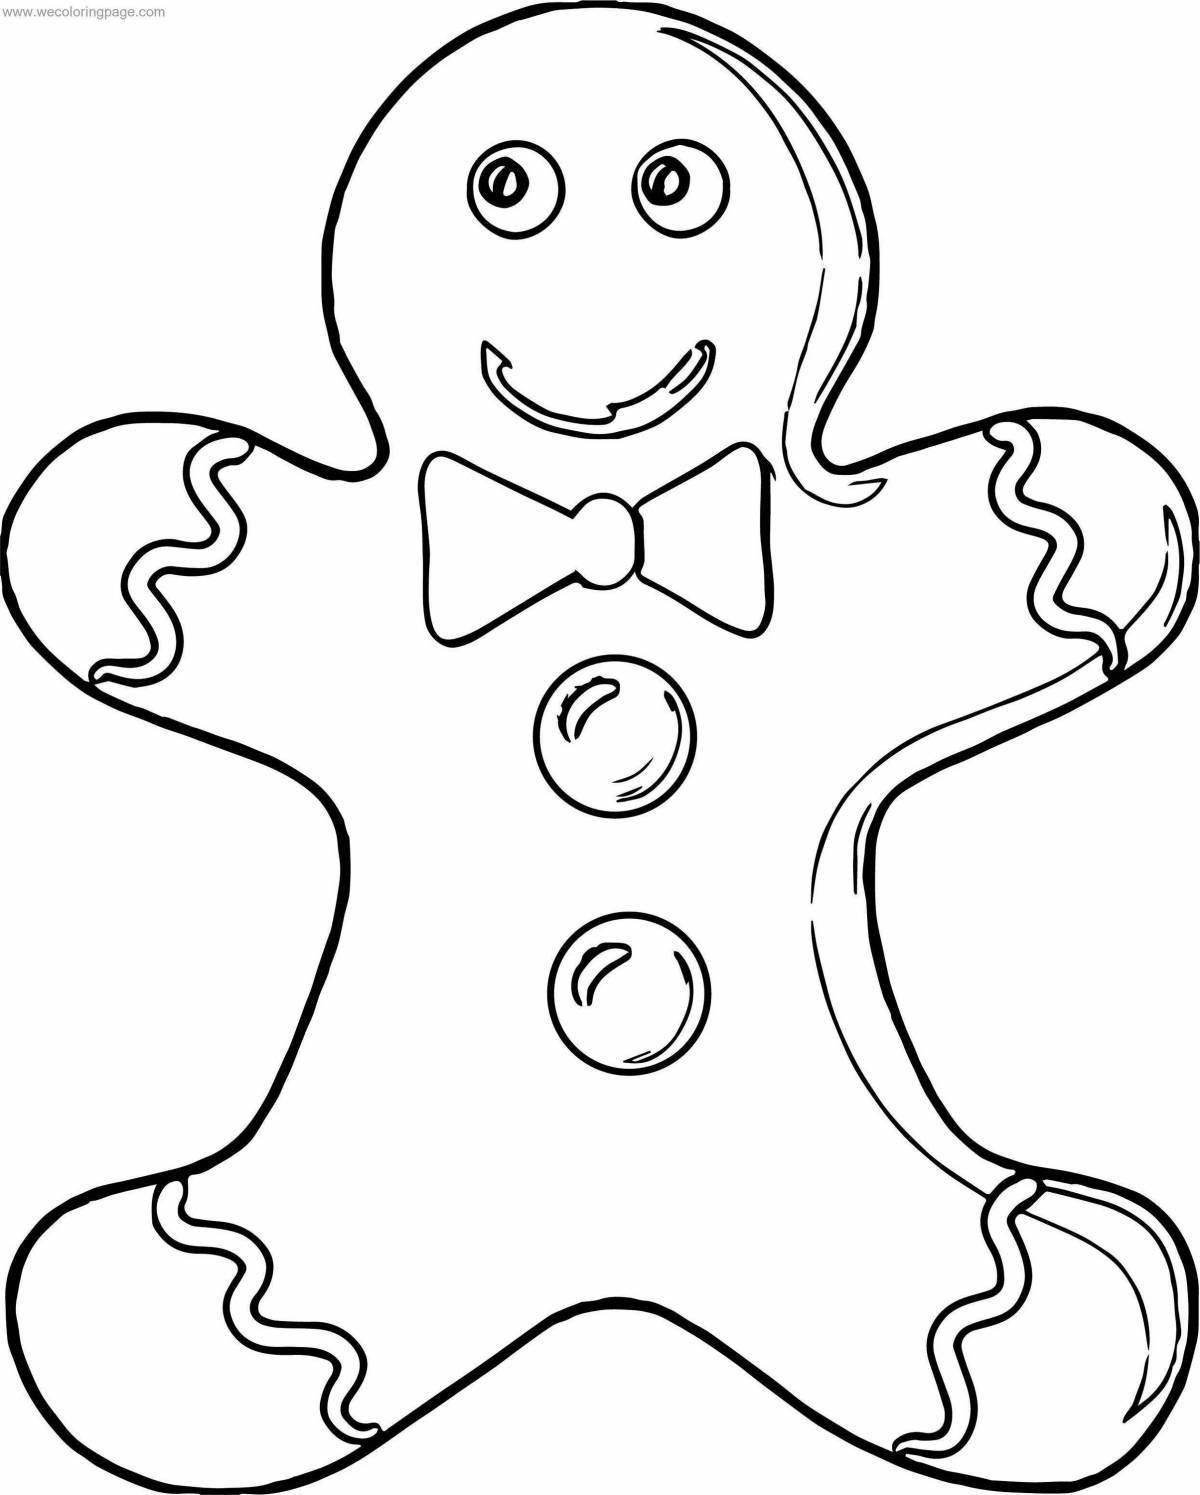 Coloring page charming Tula gingerbread